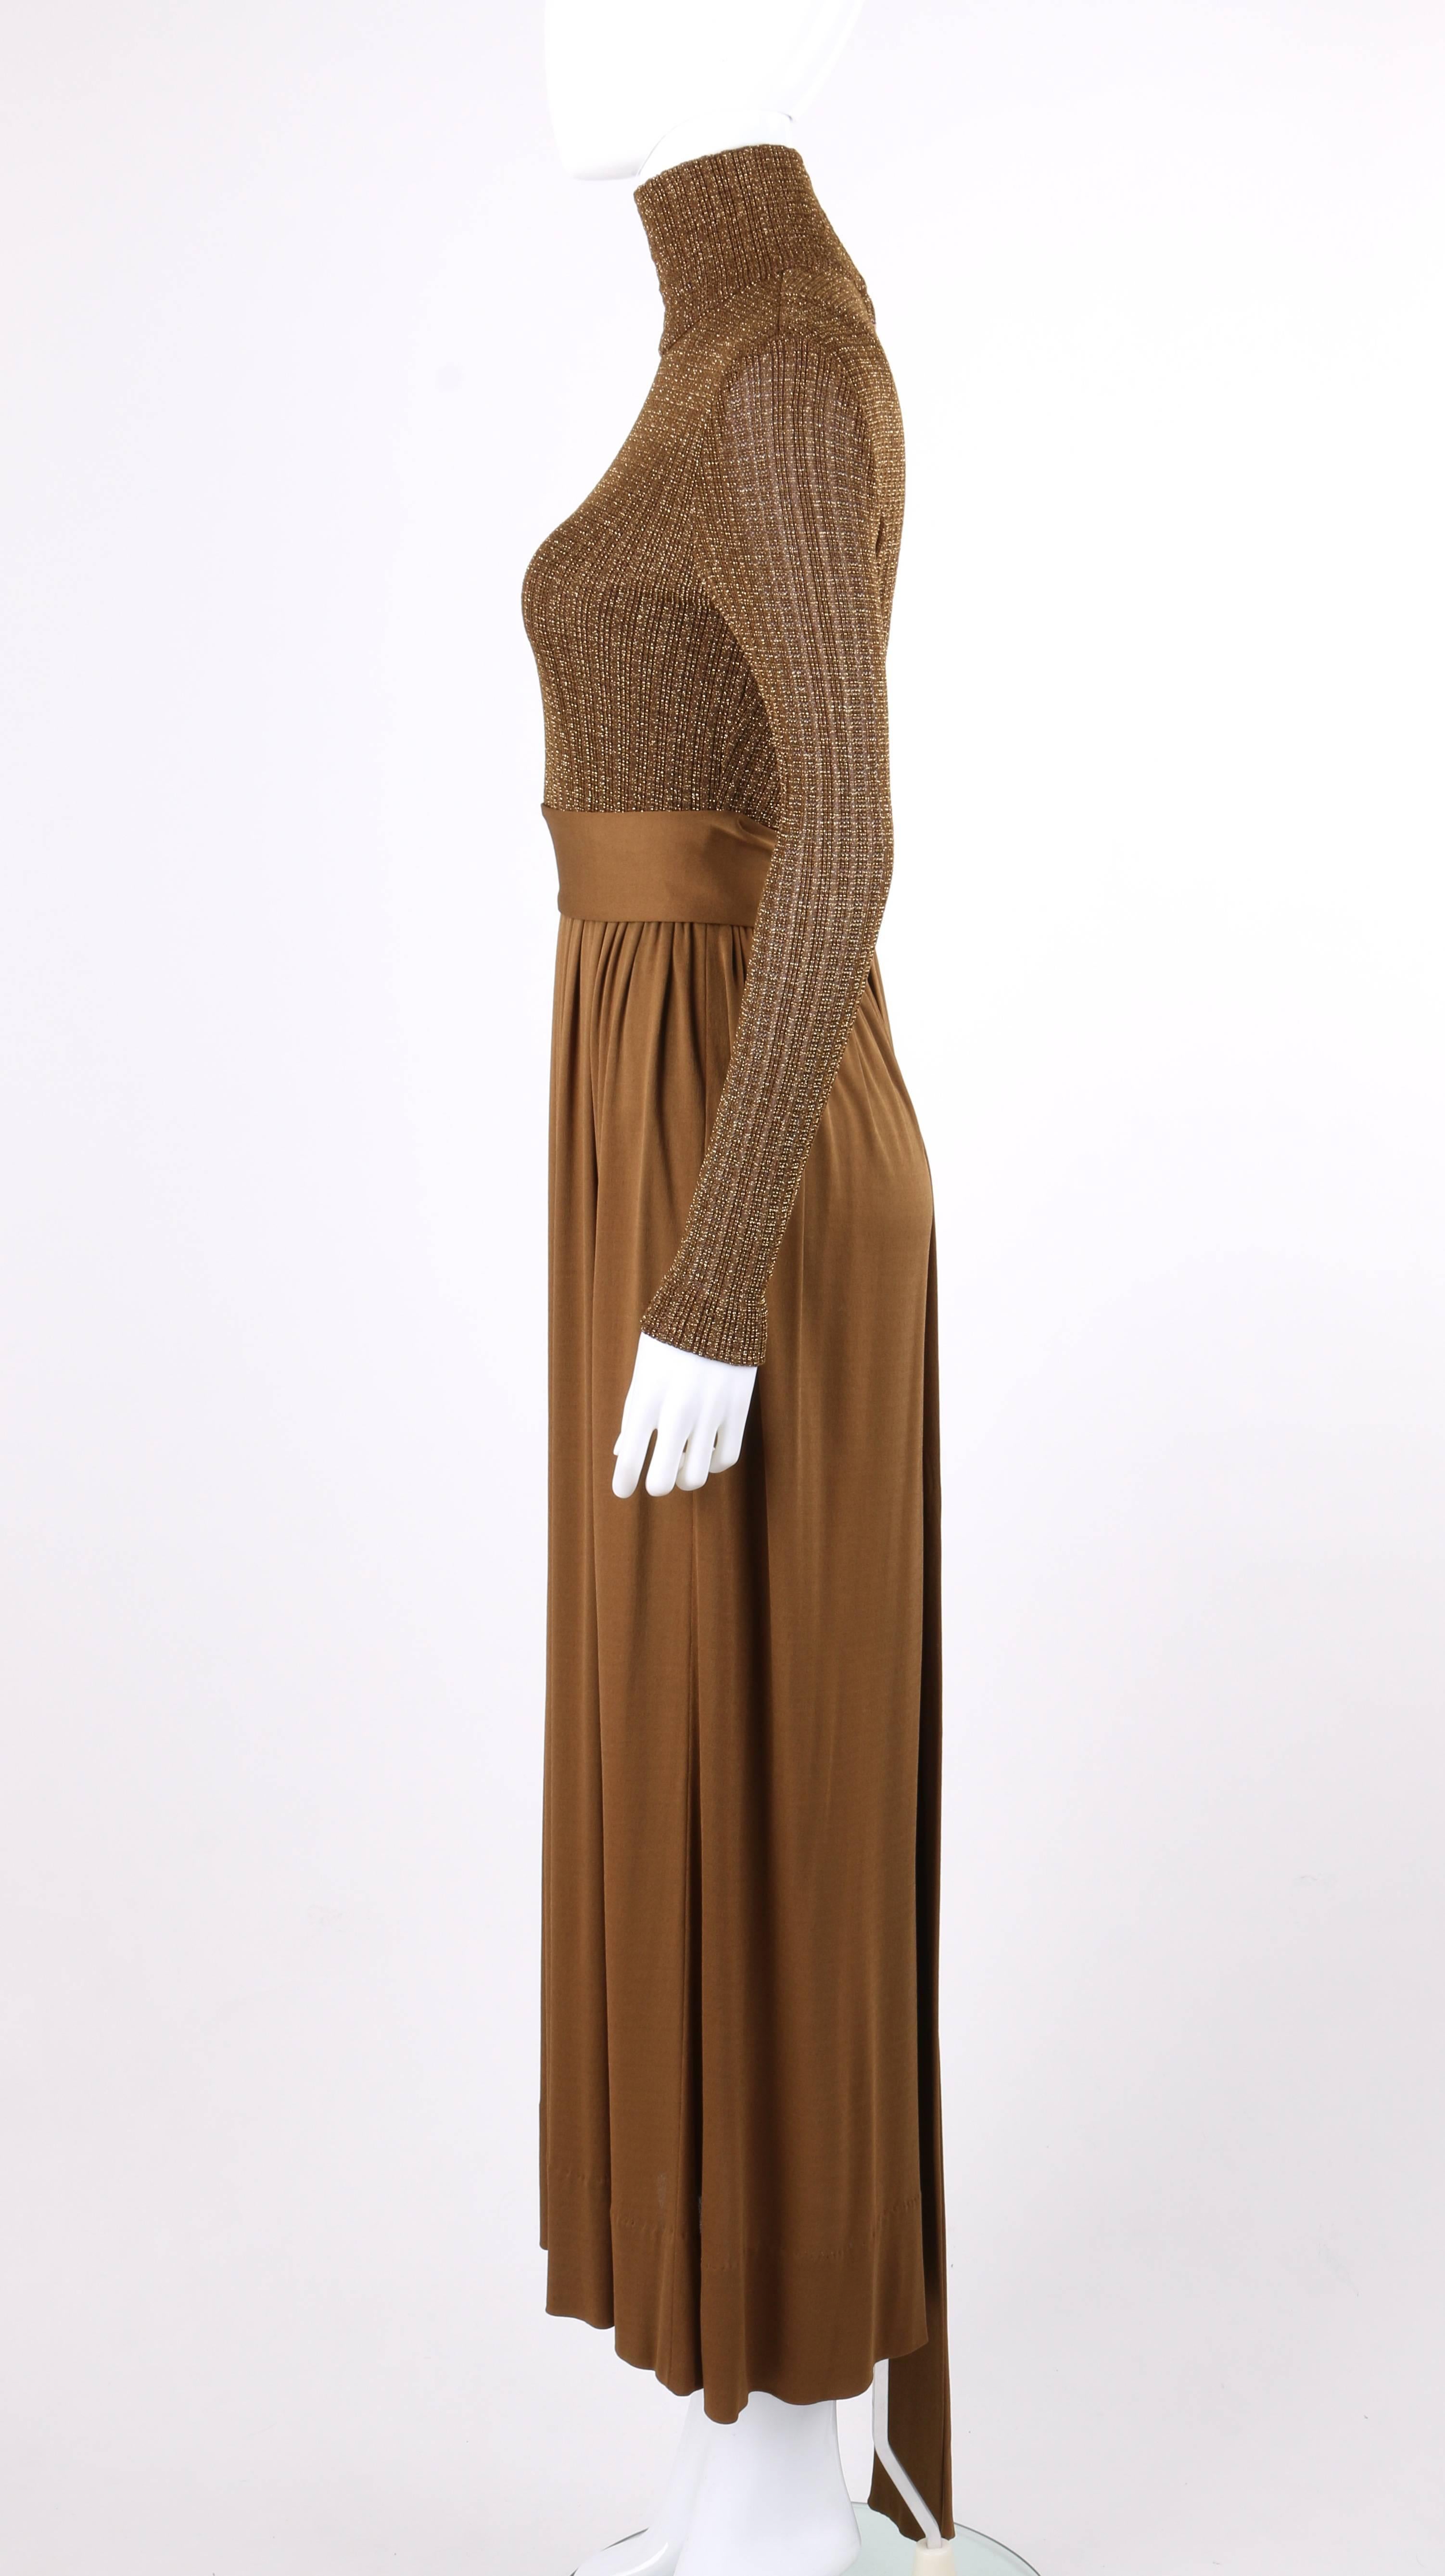 Women's RODRIGUES c.1970's Bronze Metallic Knit Long Sleeve Cocktail Evening Gown